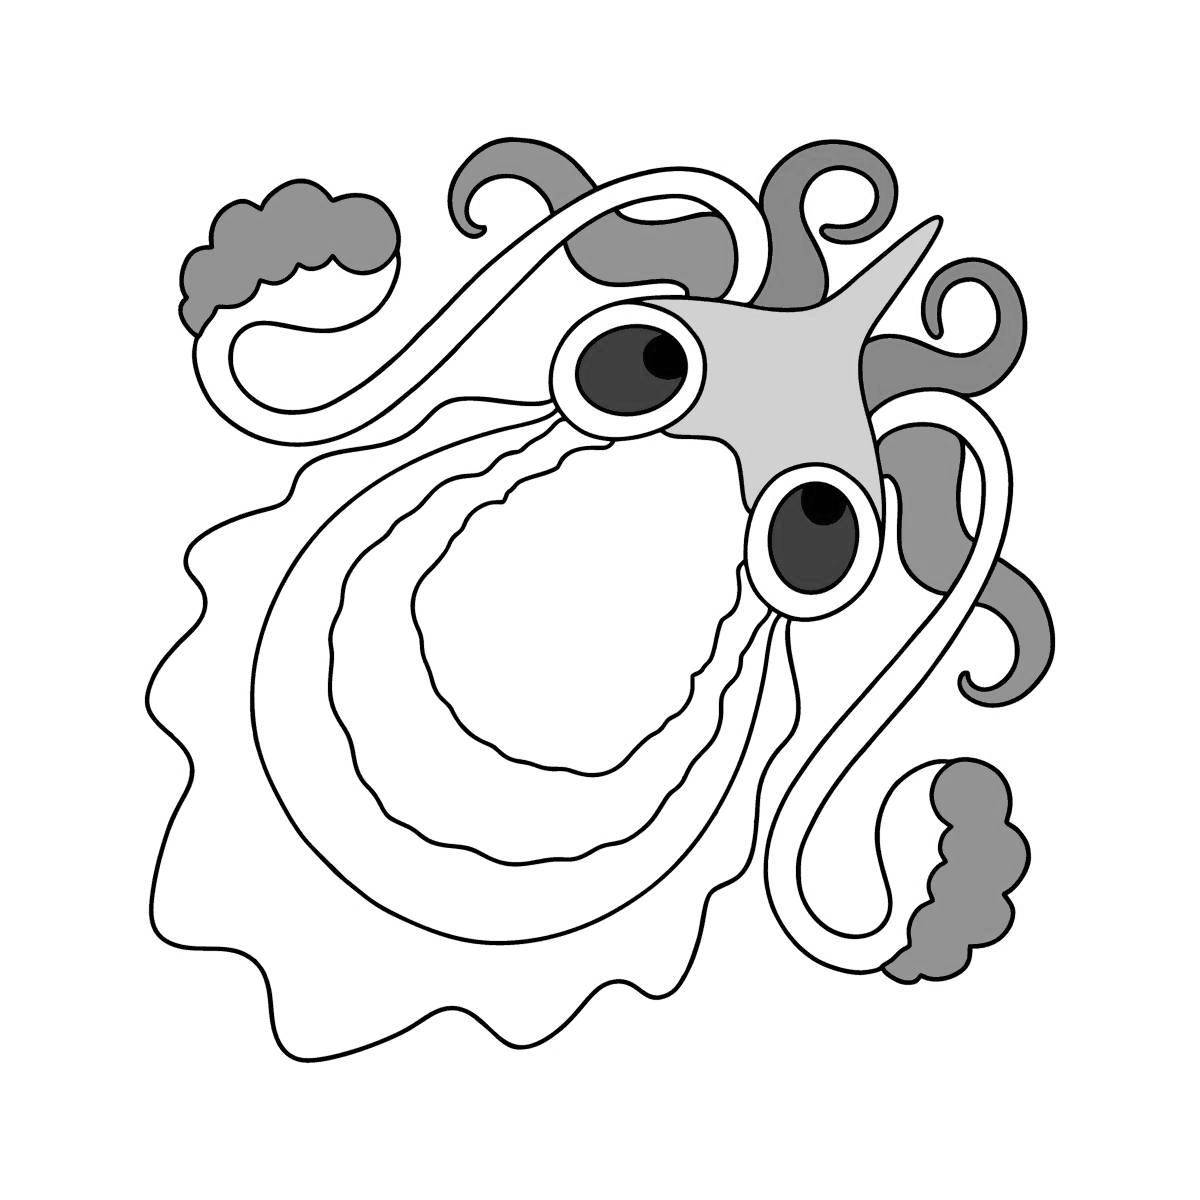 Outstanding cuttlefish coloring page